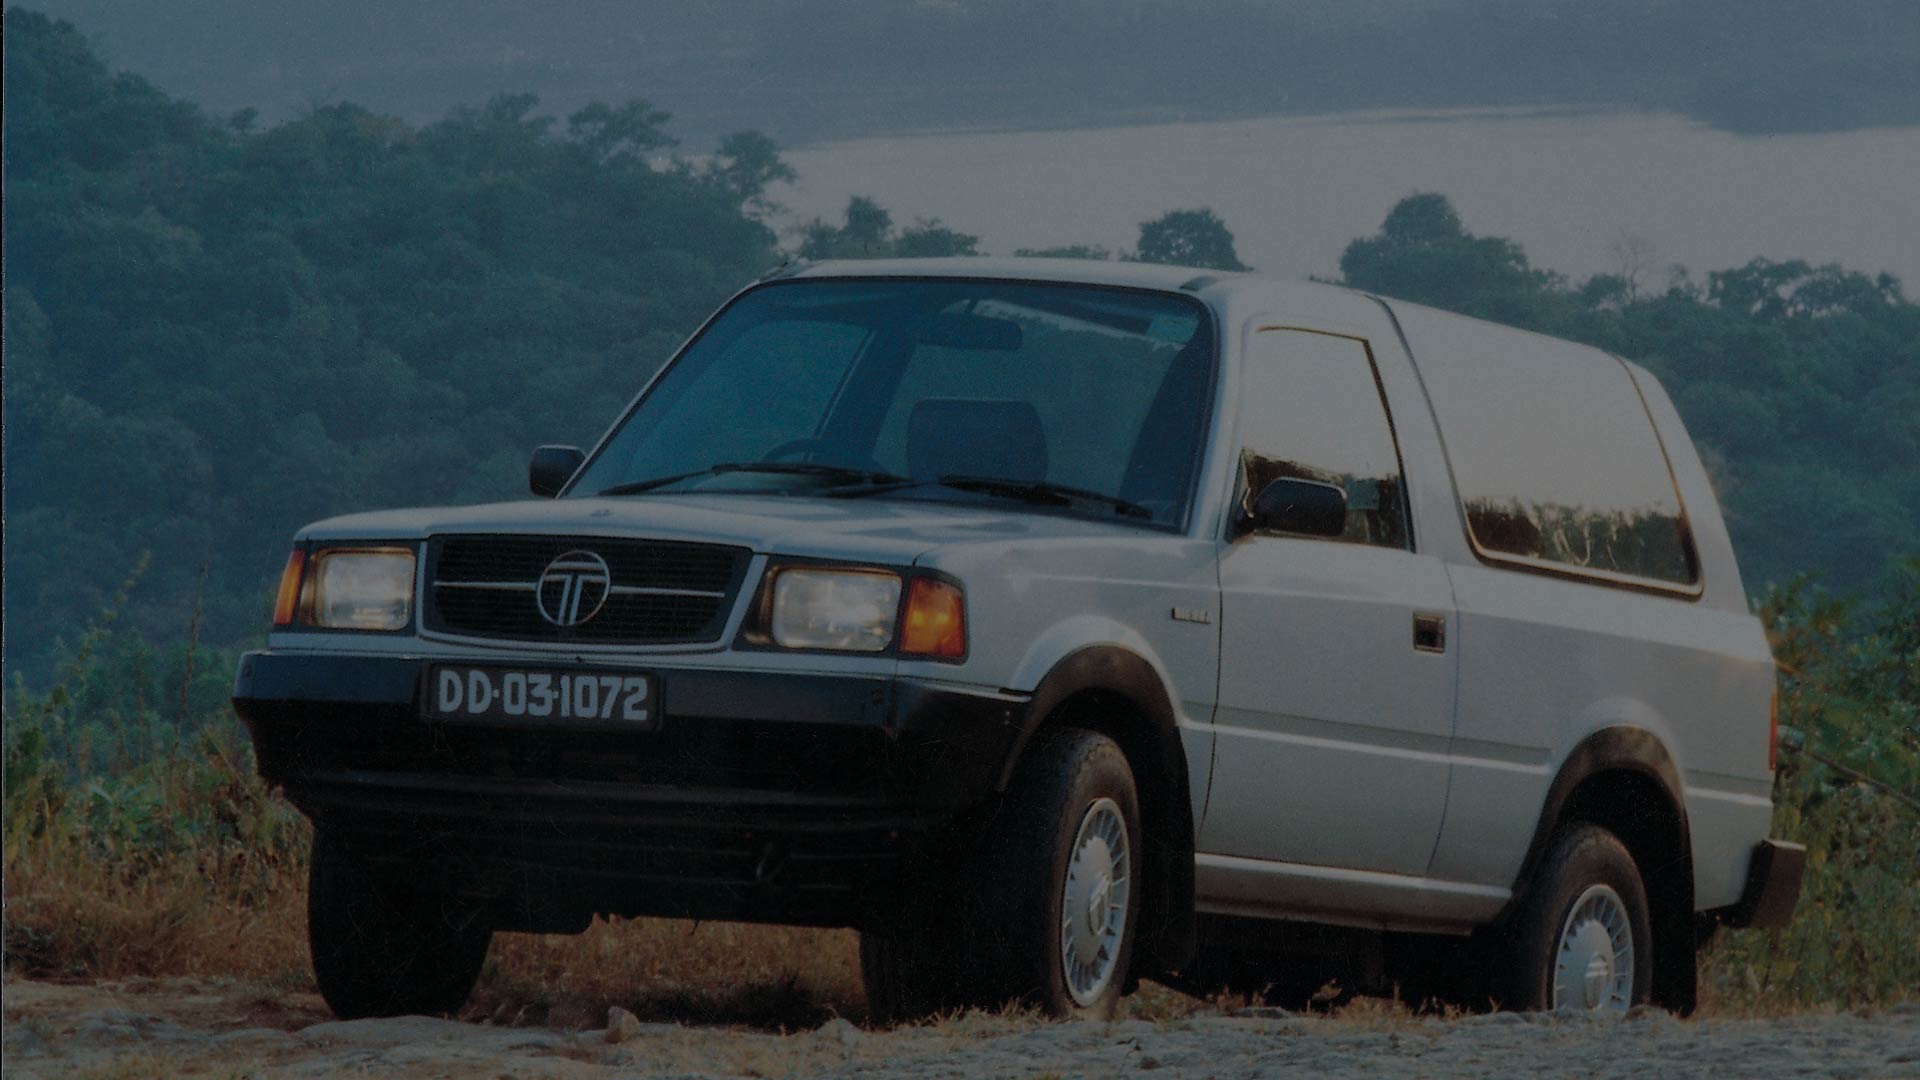 Tata Sierra was the company's foray into the passenger vehicle space